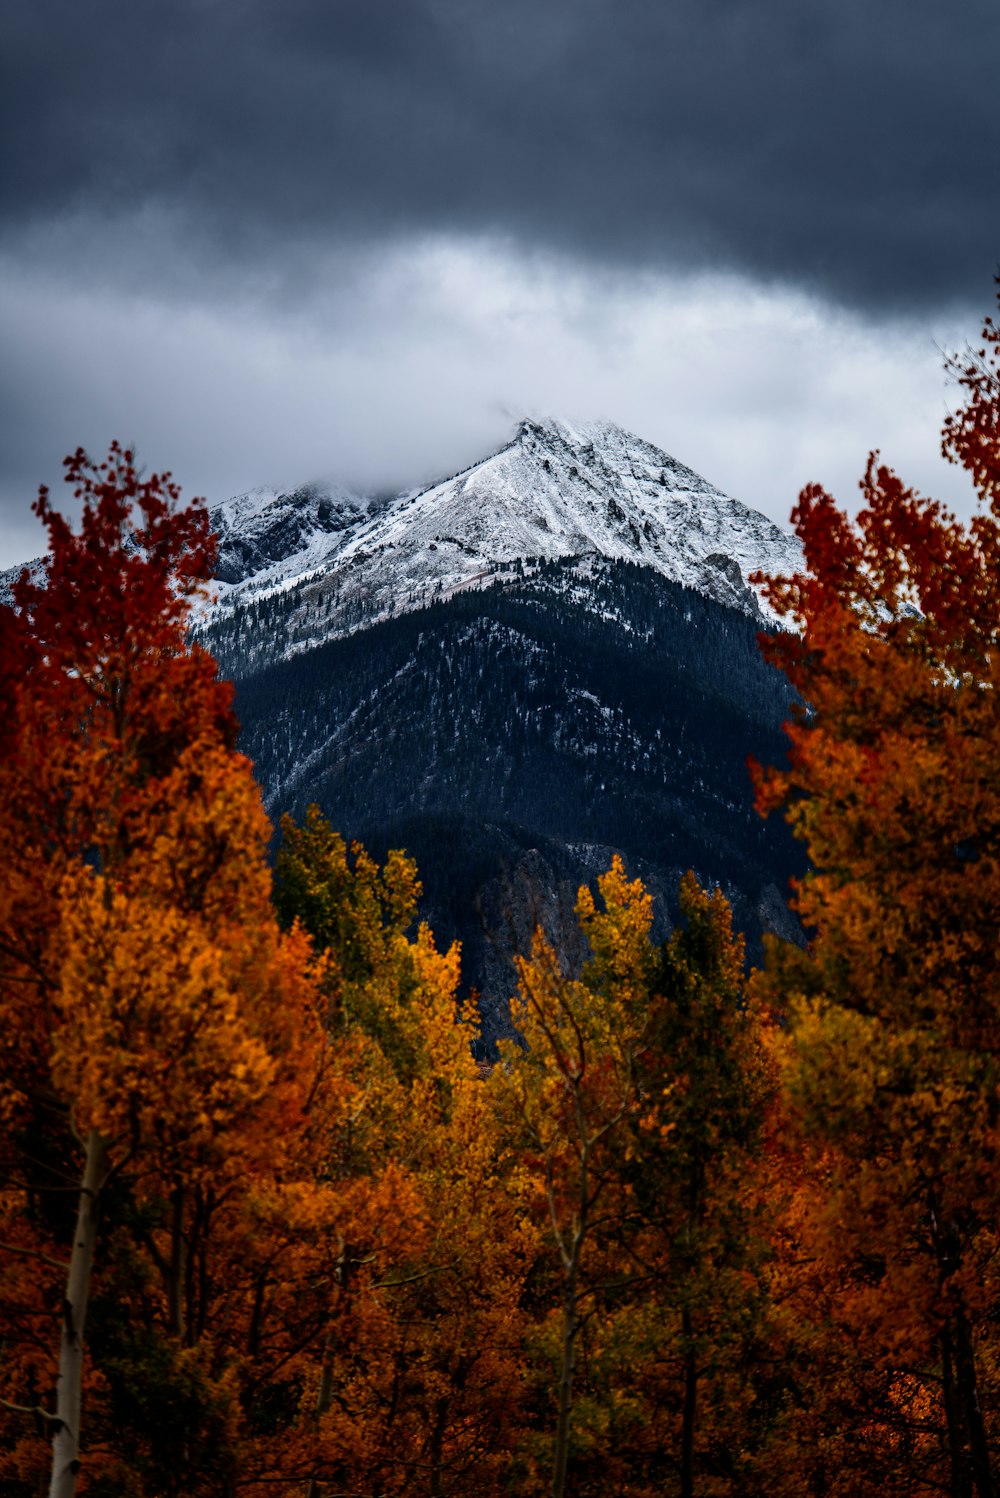 brown leafed trees in front of snow covered mountain under cloudy sky